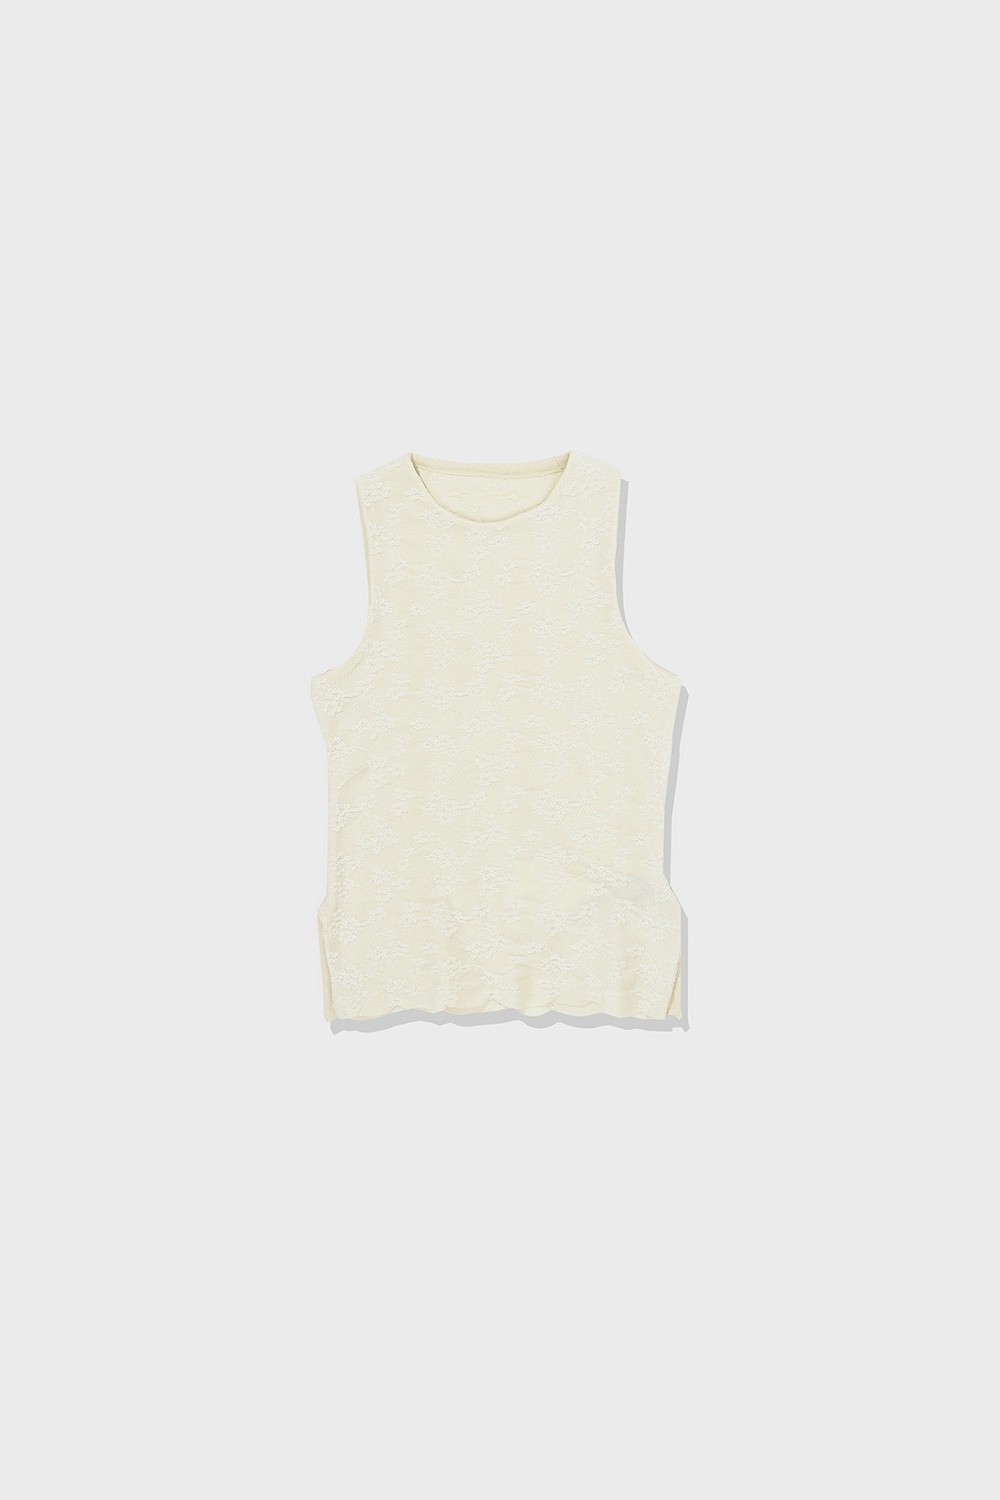 FLORAL EMBROIDERY KNIT SLEEVELESS TOP - IVORY